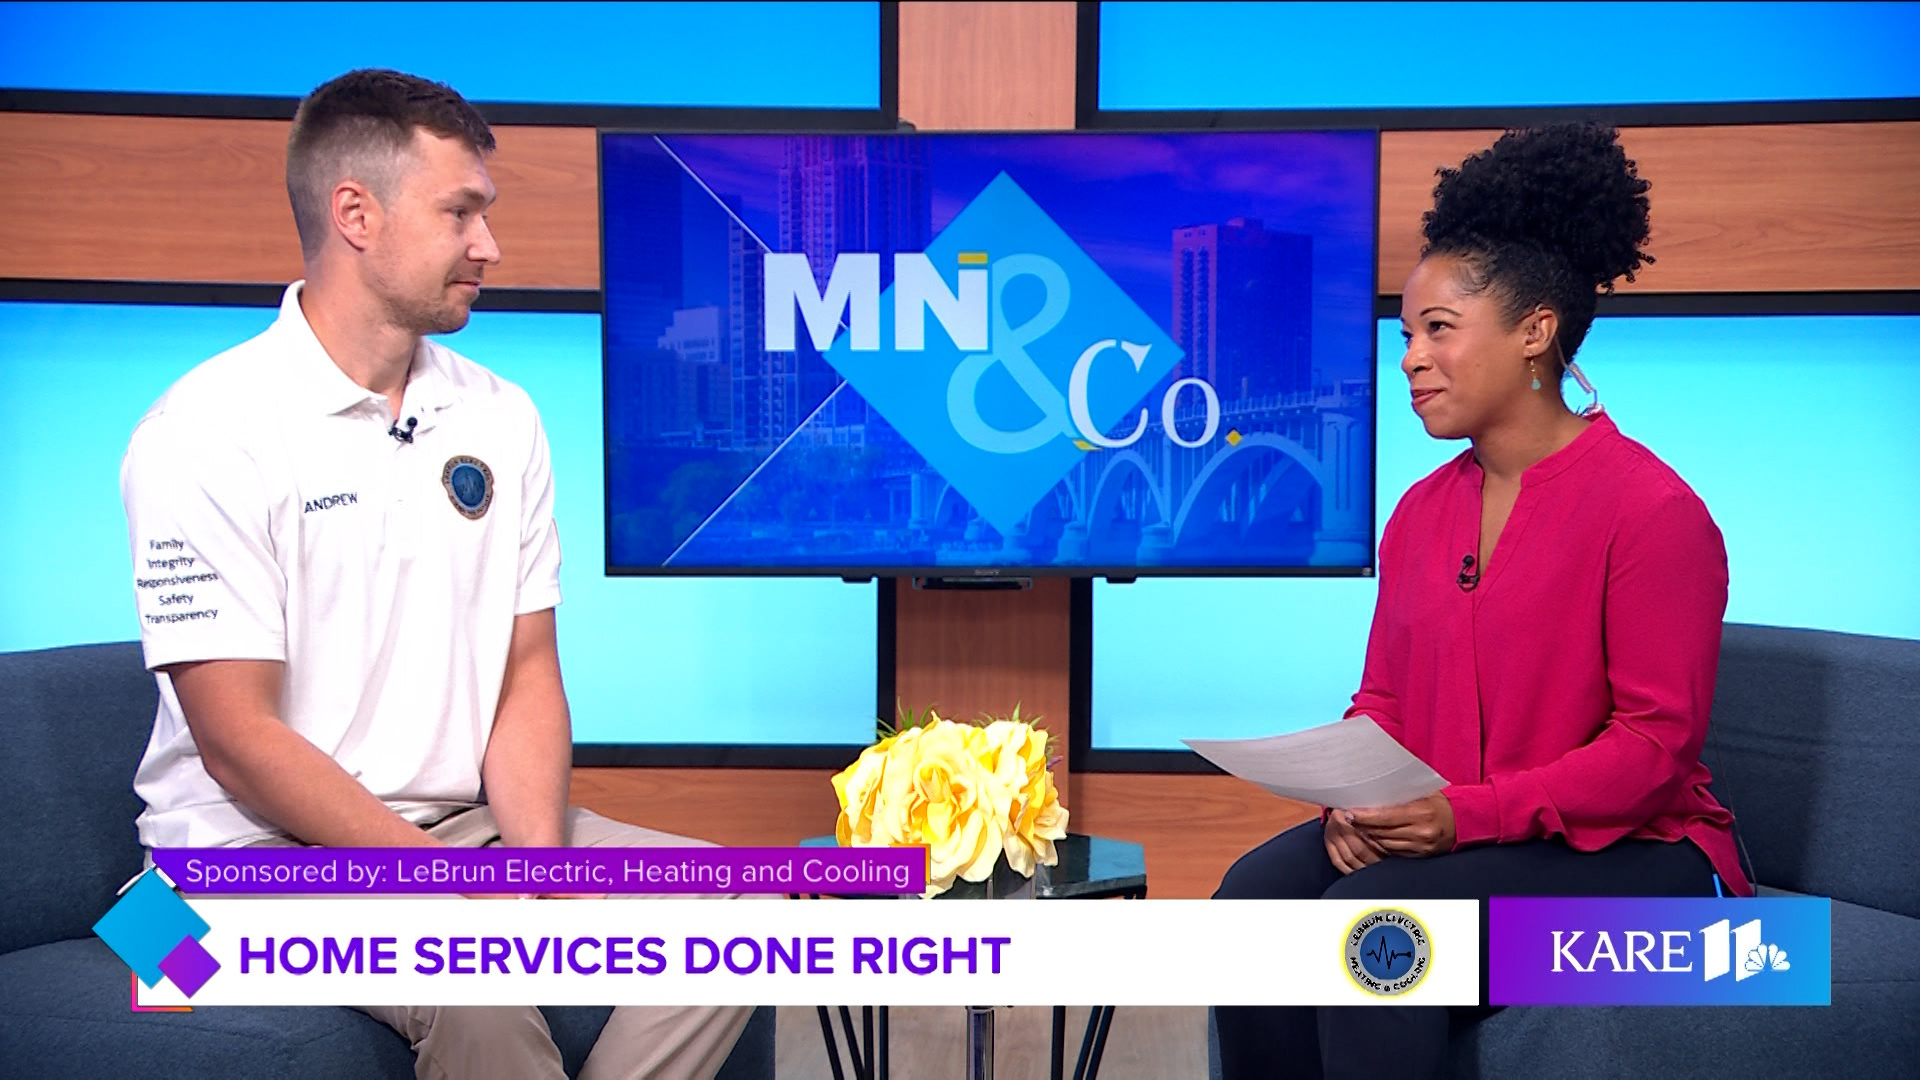 LeBrun Electric, Heating and Cooling joins Minnesota and Company to discuss their home services and specials for the summer.